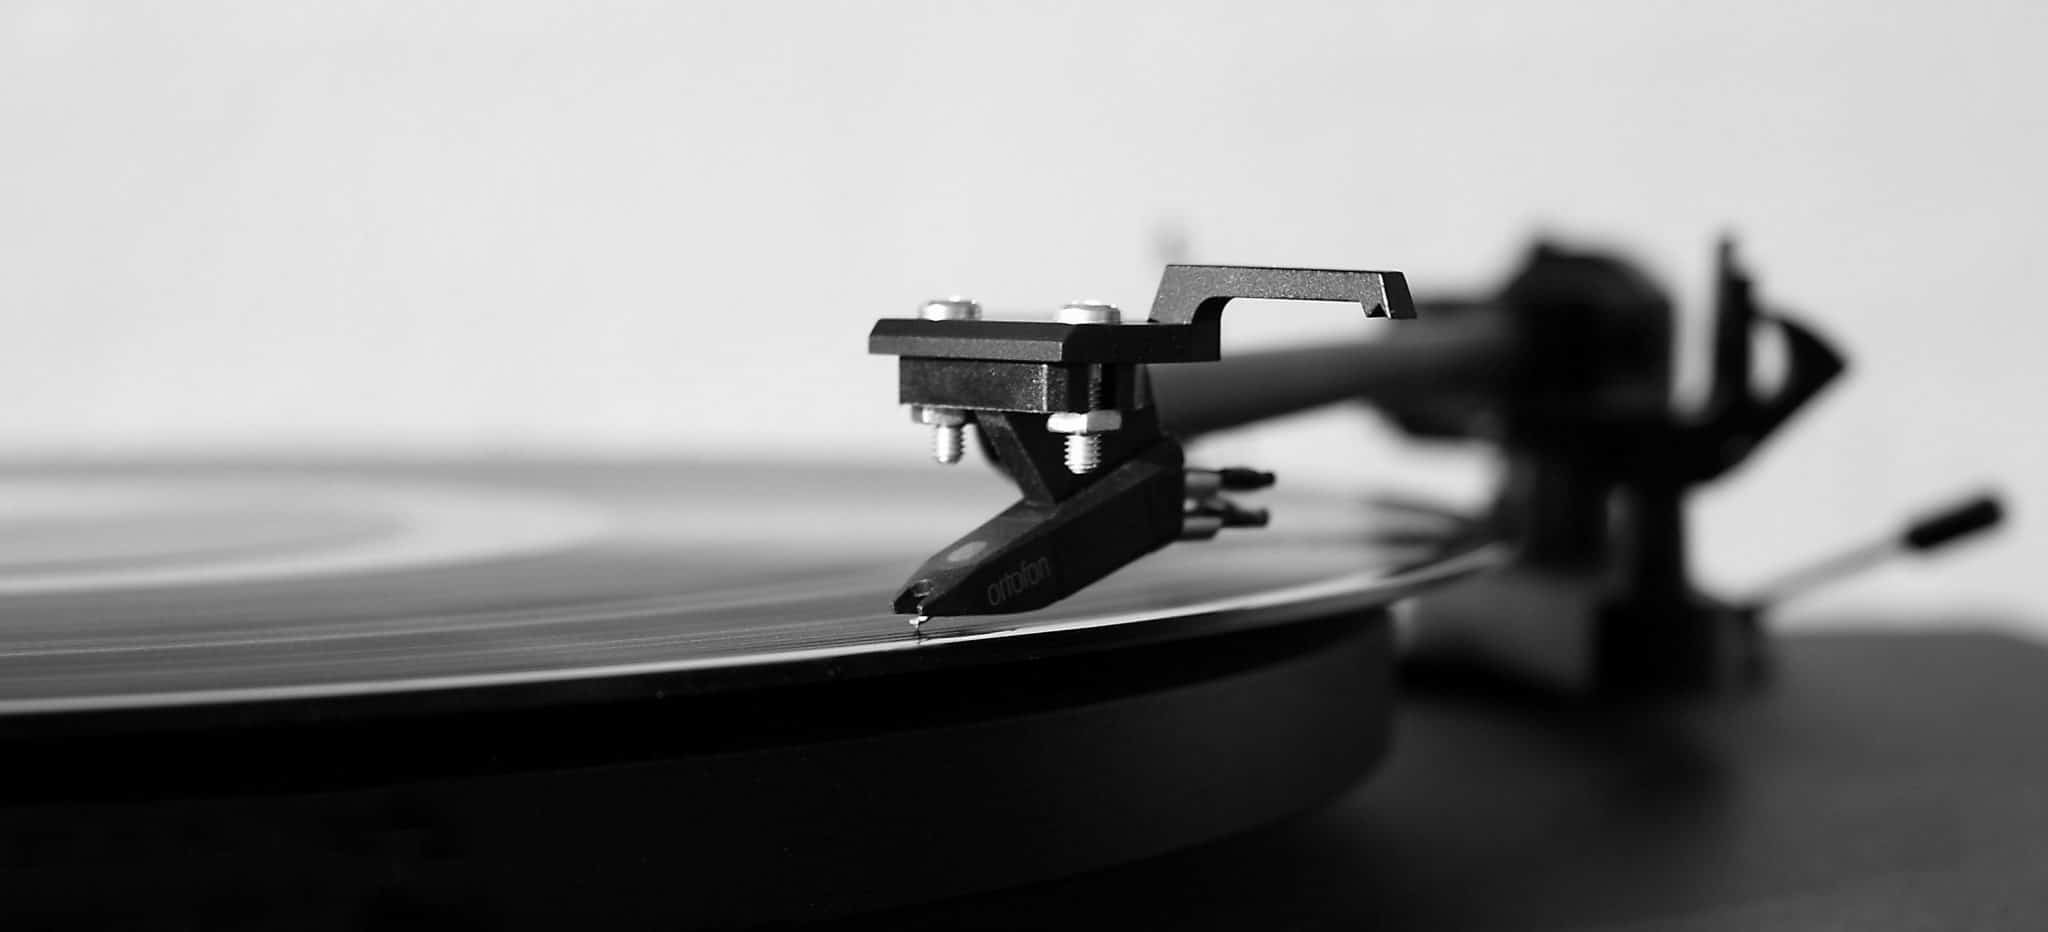 BEGINNERS QUESTIONS ON TURNTABLES